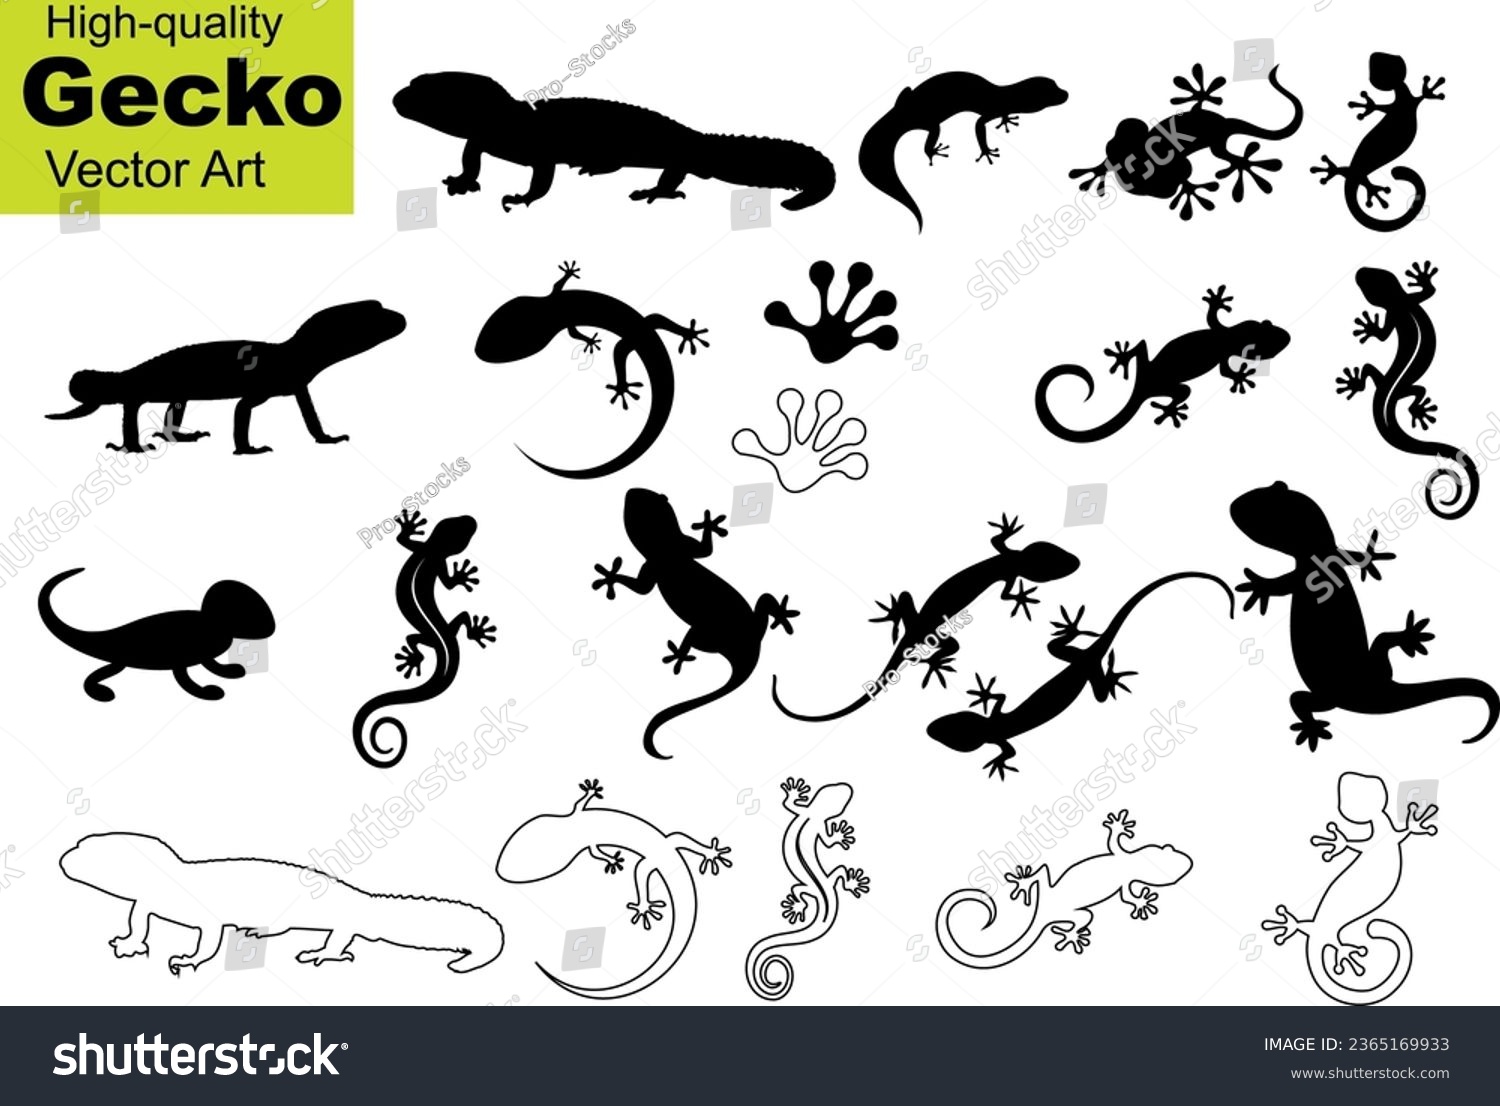 SVG of Gecko Vector Art Collection - A unique, high-quality set of 20 black and white gecko designs. The collection includes a variety of styles from realistic to cartoon-like, perfect for any design project svg